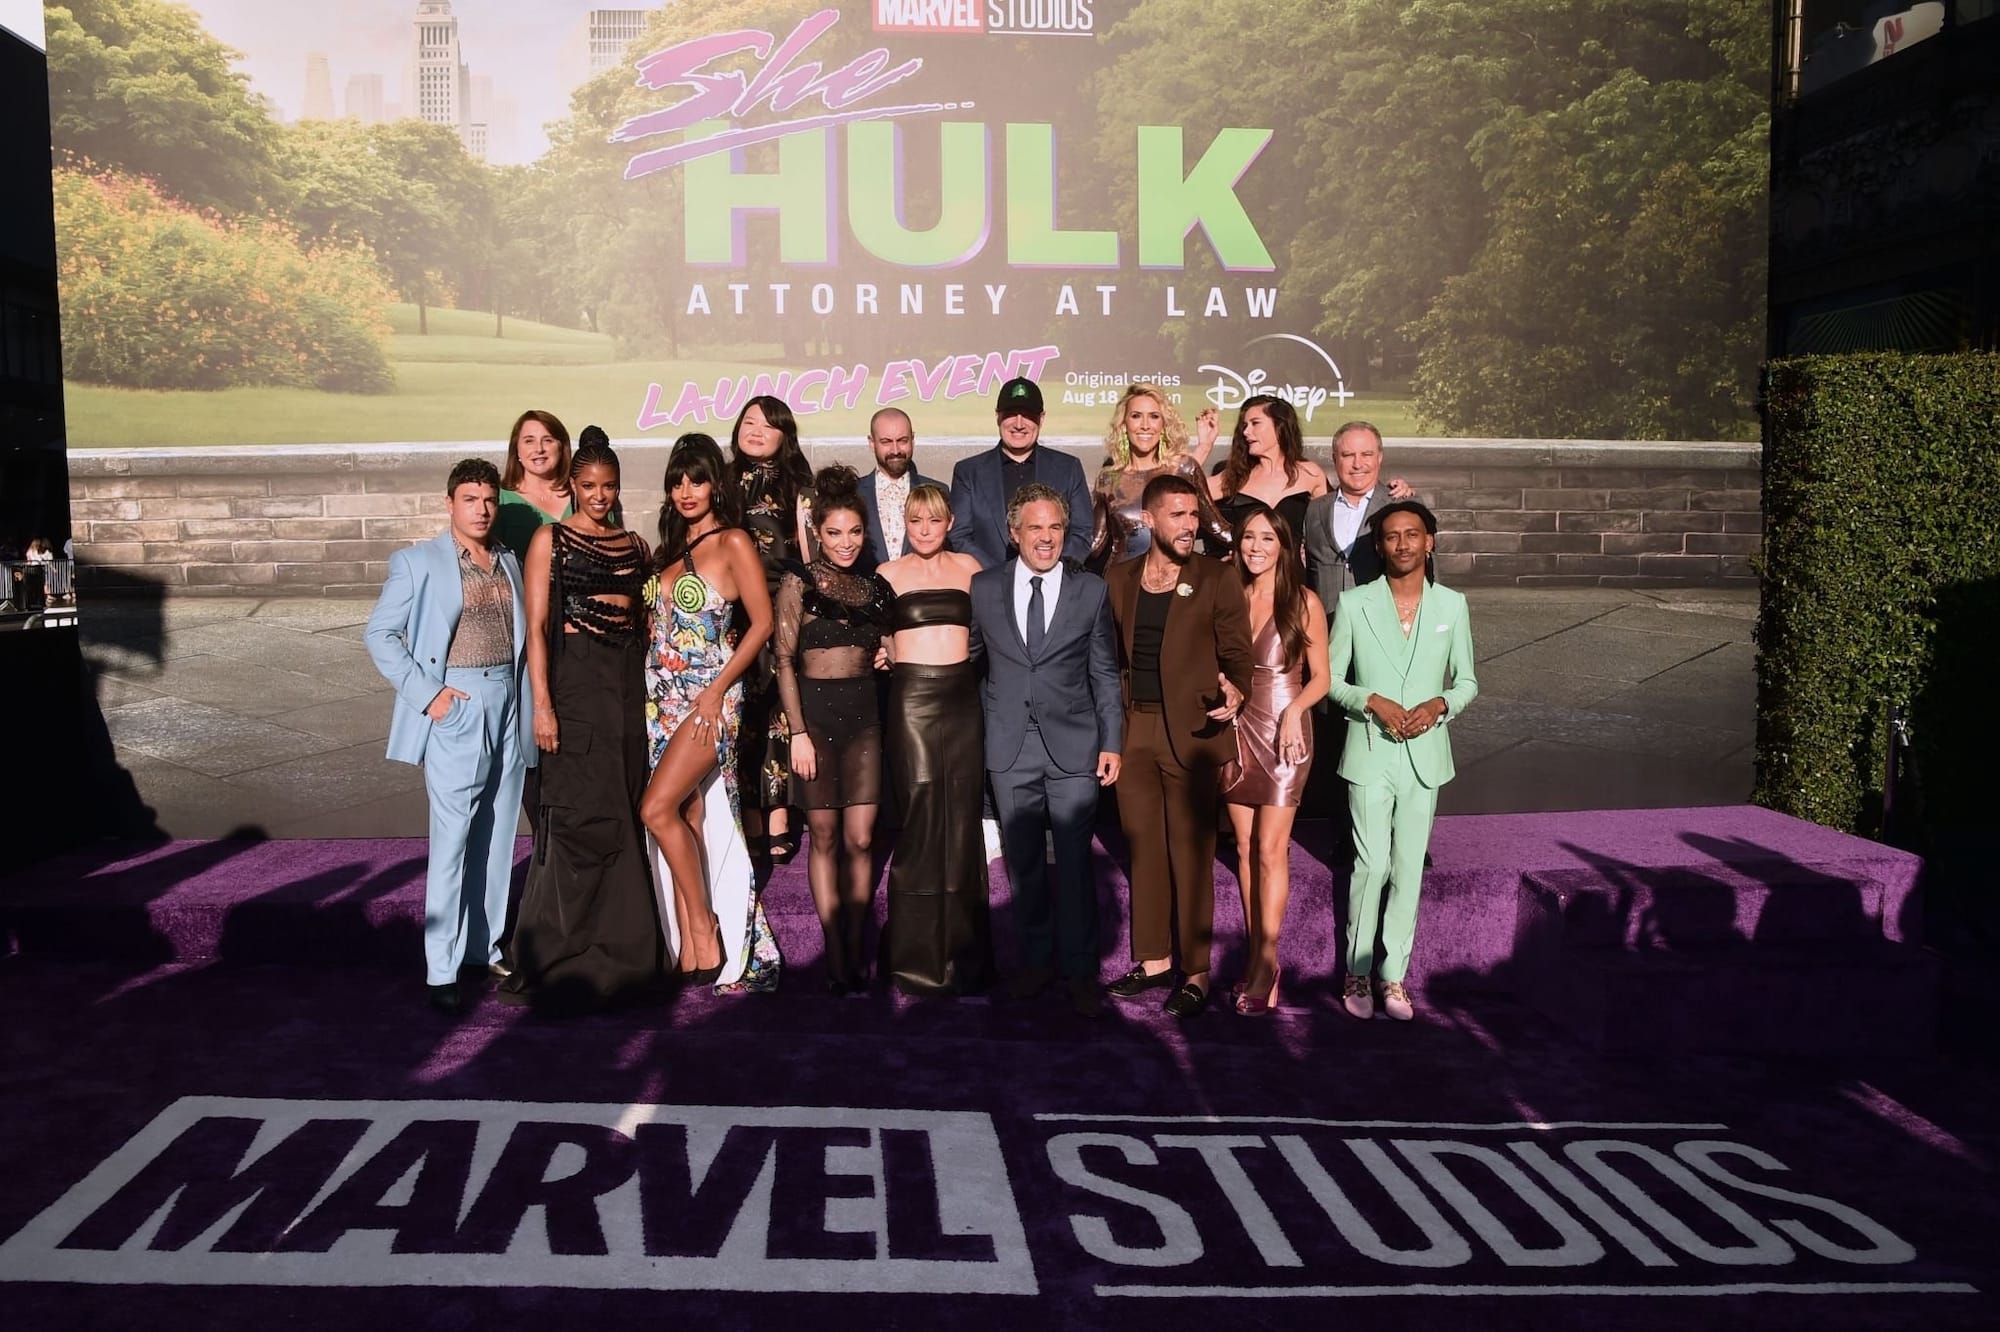 Jameela with the her She-Hulk: Attorney at Law co-stars on the red carpet.